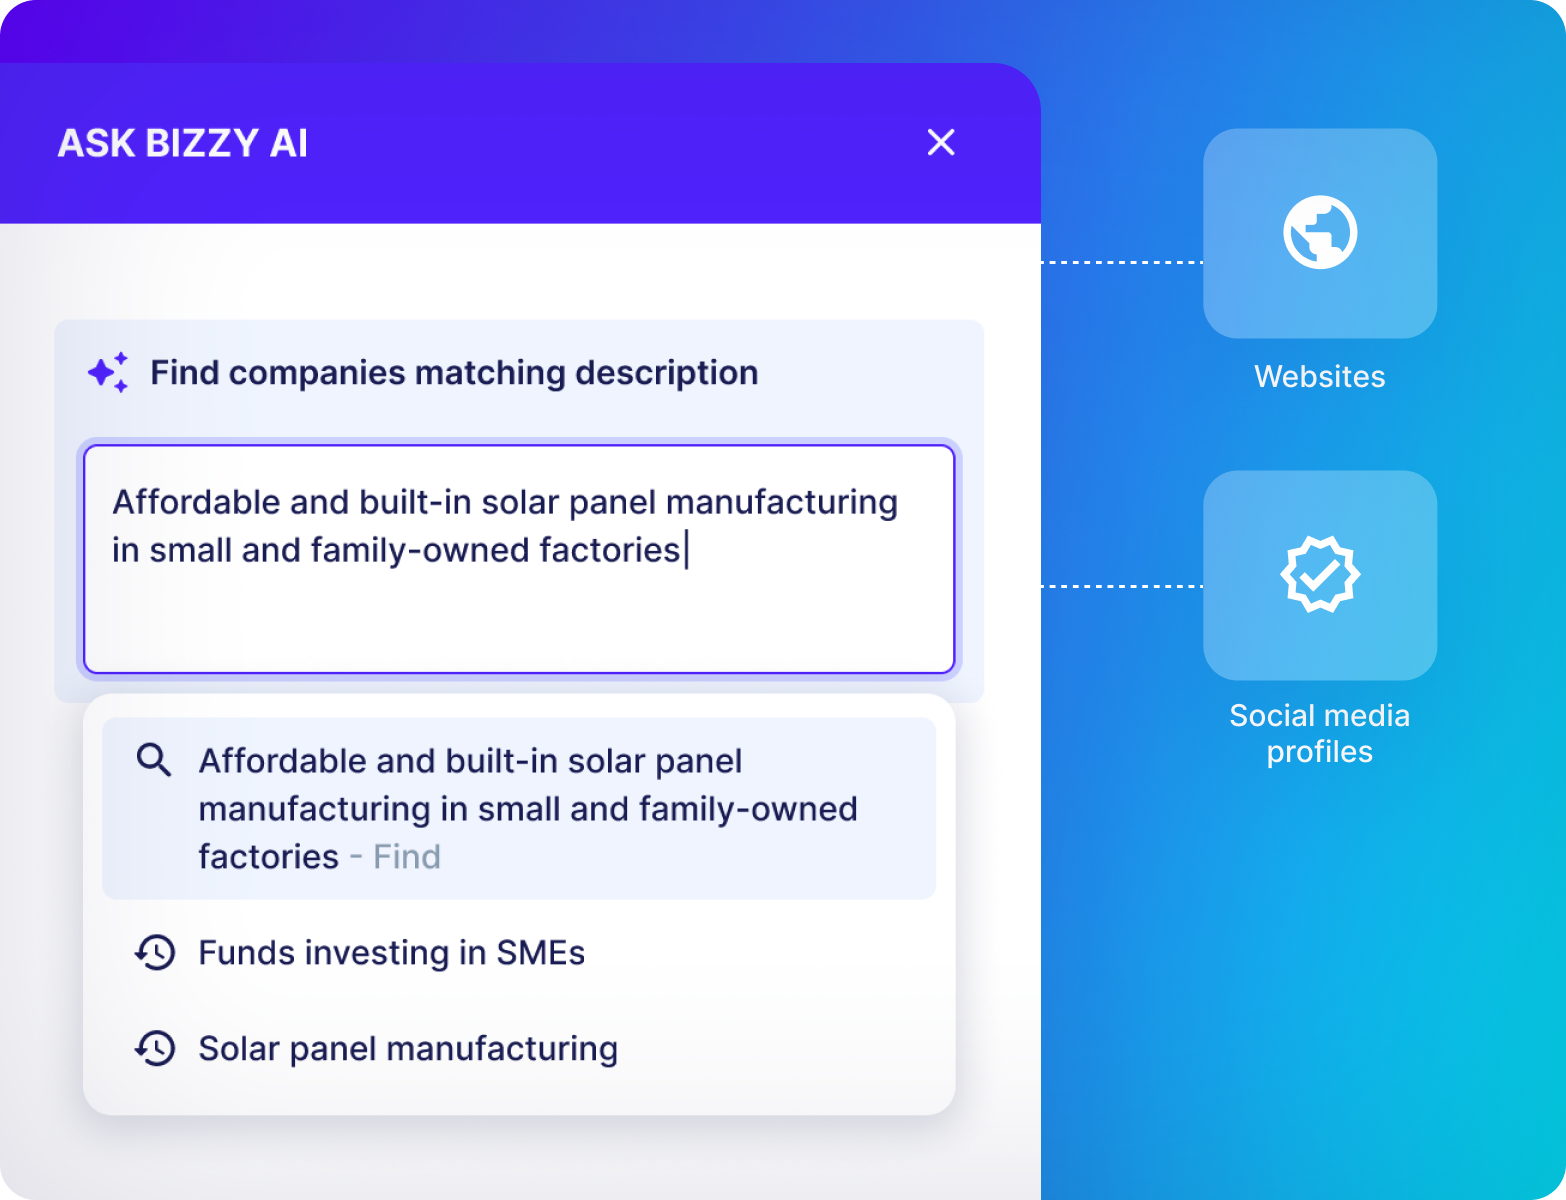 AI-driven prospecting: Find prospects in very specific niches. Bizzy’s Lead Generator is one of the smartest prospecting tools in the market. Ask AI to match descriptions and get high quality prospects.